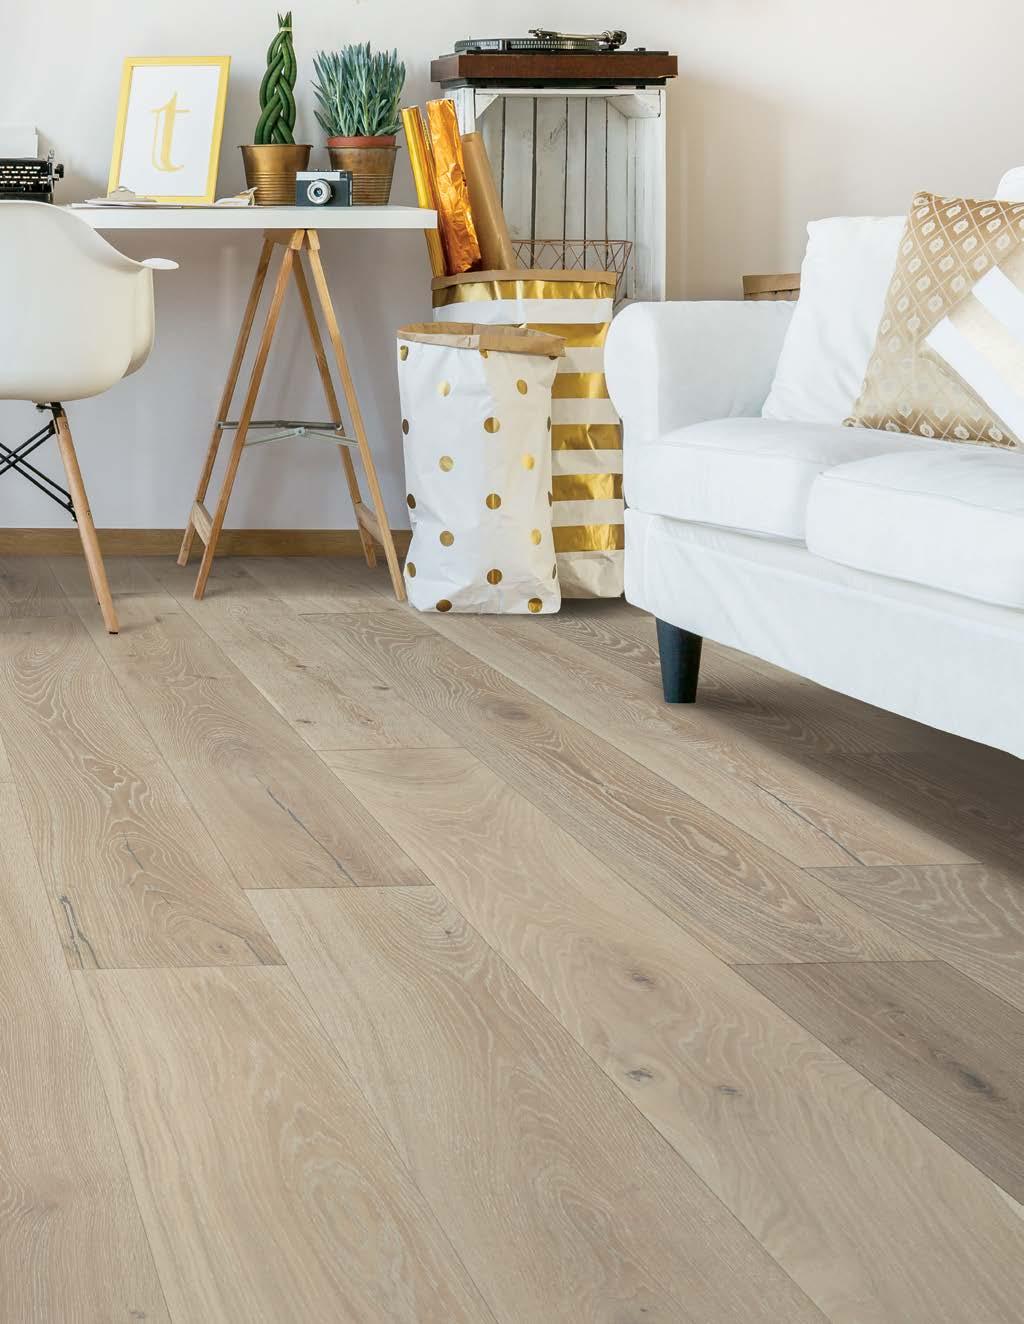 U.S. GREEN BUILDING COUNCIL R Proud Members of: National Wood Flooring Association M E M B E R WORLD FLOOR COVERING ASSOCIATION Images and actual hardwood floor samples are intended as visual guides